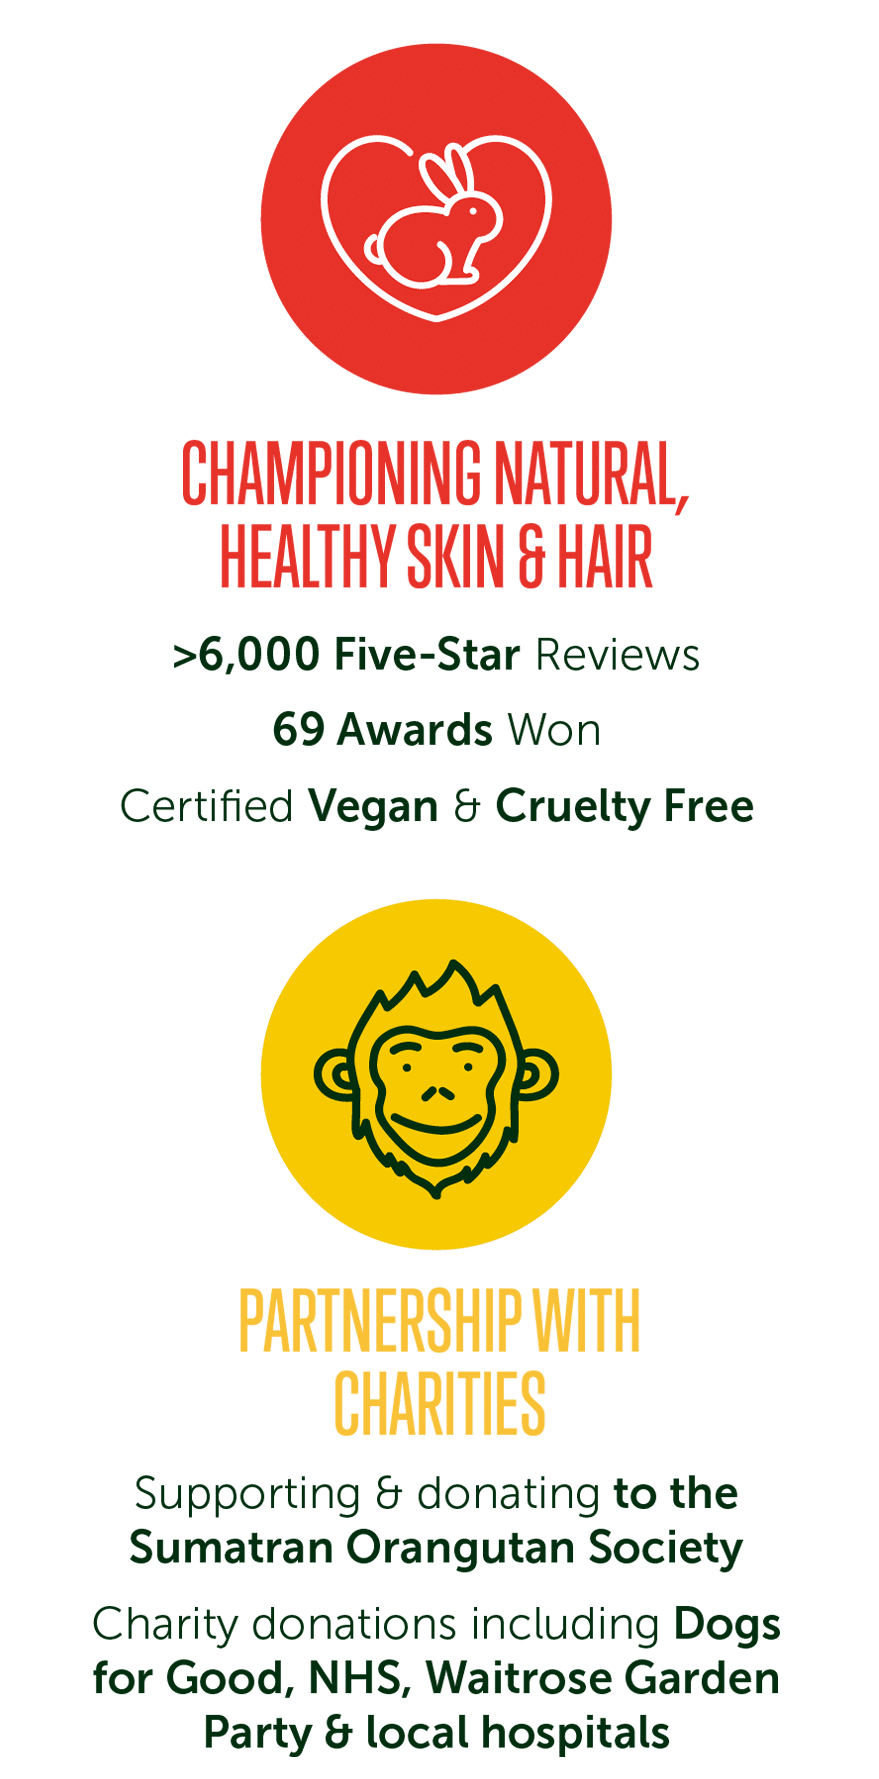 Icon with title of "Championing natural, healthy skin & hair" with sub-points including ">6,000 five-star reviews", "69 awards won" and "Certified vegan & cruelty free" and another icon with title "Partnership with charities" with sub-points including "Supporting & donating to the Sumatran Orangutan Society" and "Charity donations including Dogs for Goods, NHS, Waitrose Garden Party & local hospitals"